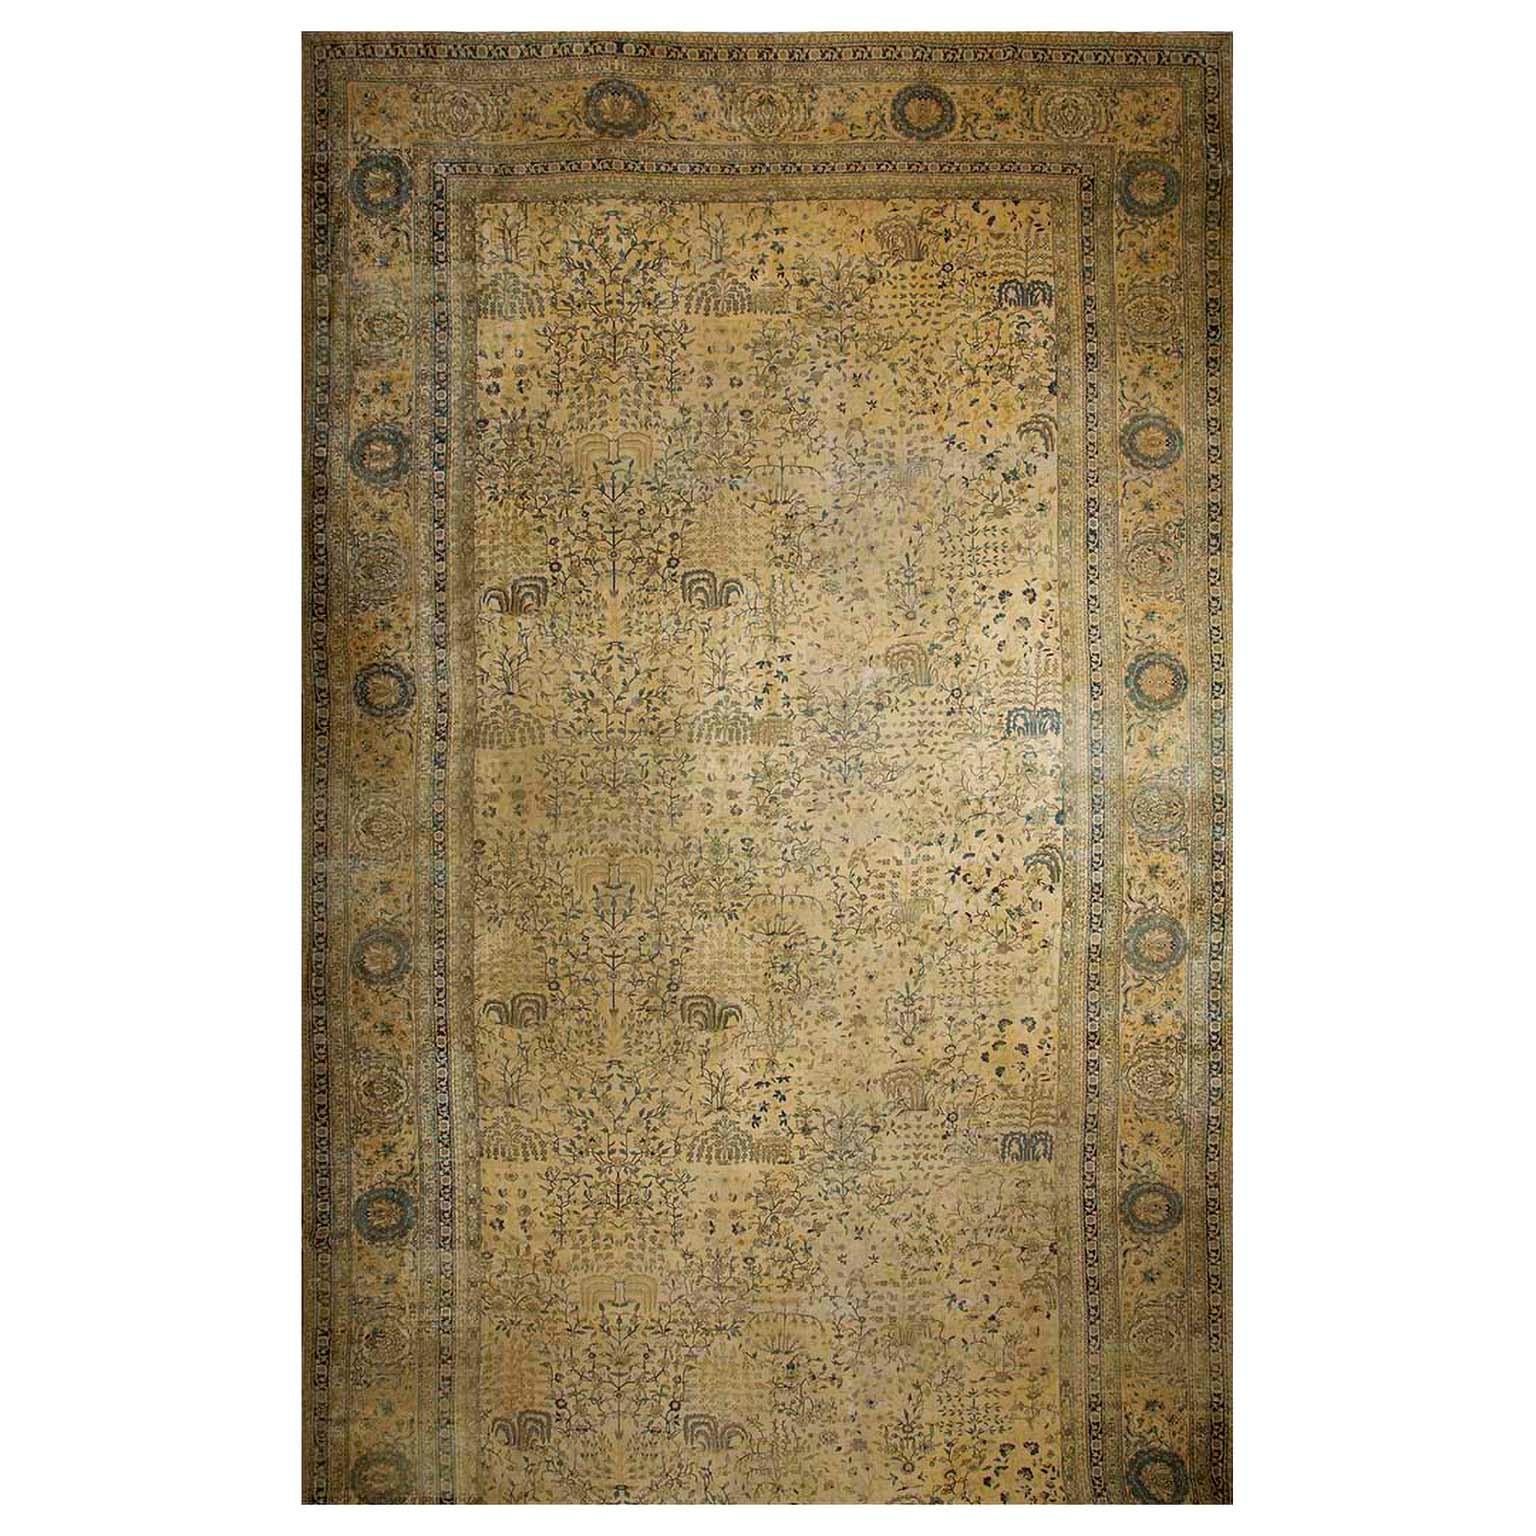 Early 20th Century Indian Lahore Carpet ( 12'6" x 24 - 381 x 732 )